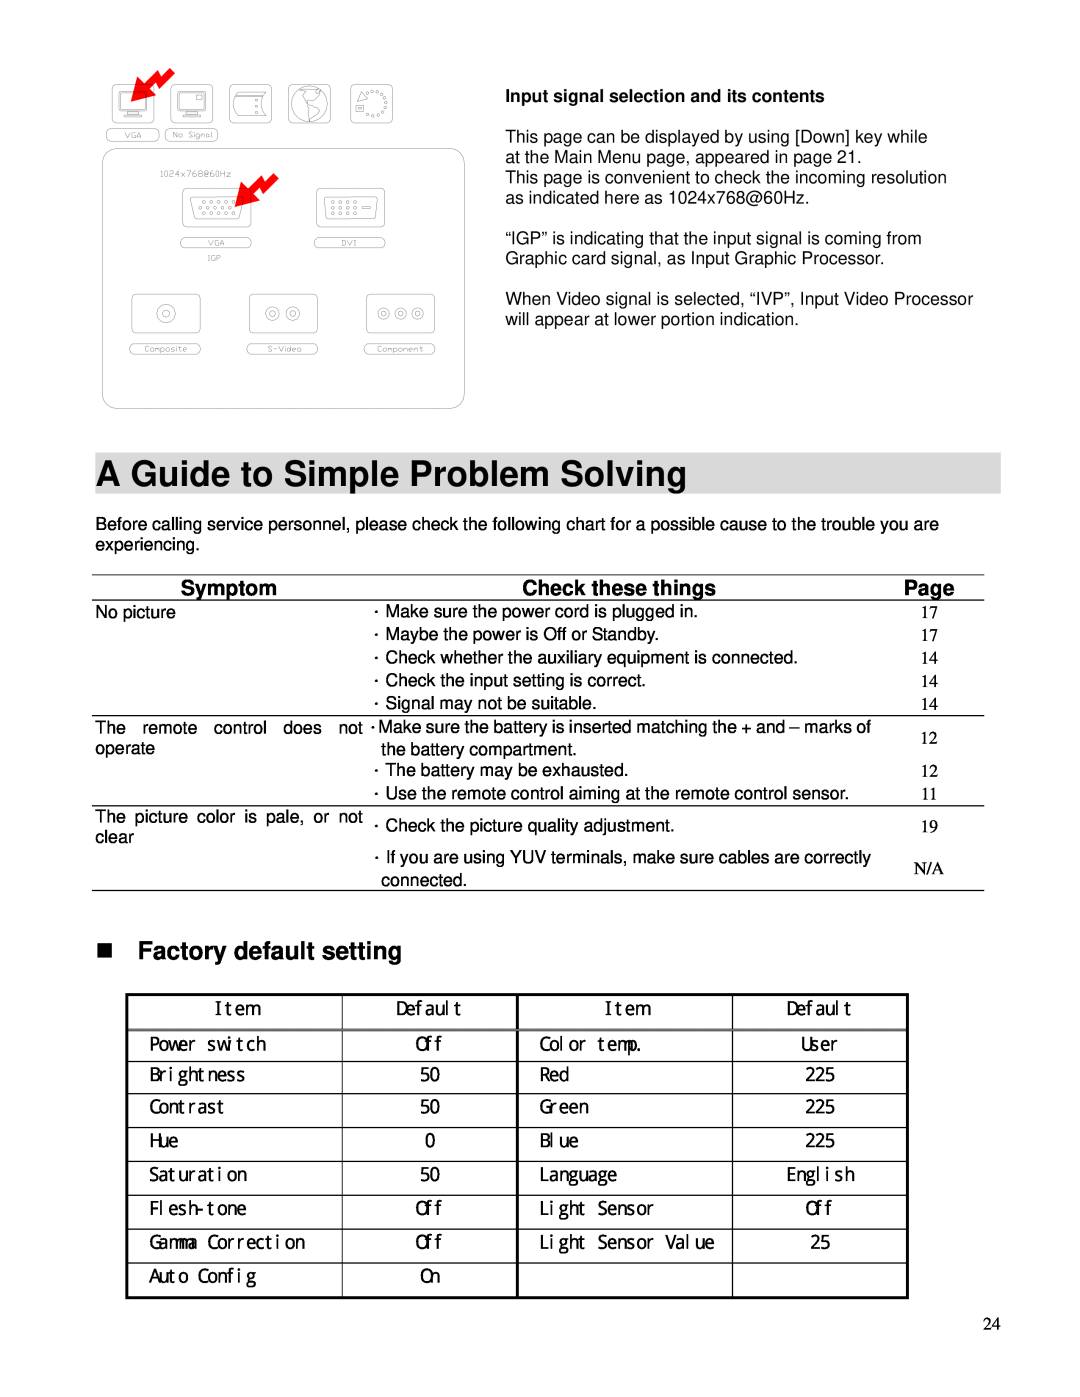 Toshiba P42LHA owner manual A Guide to Simple Problem Solving, Factory default setting 